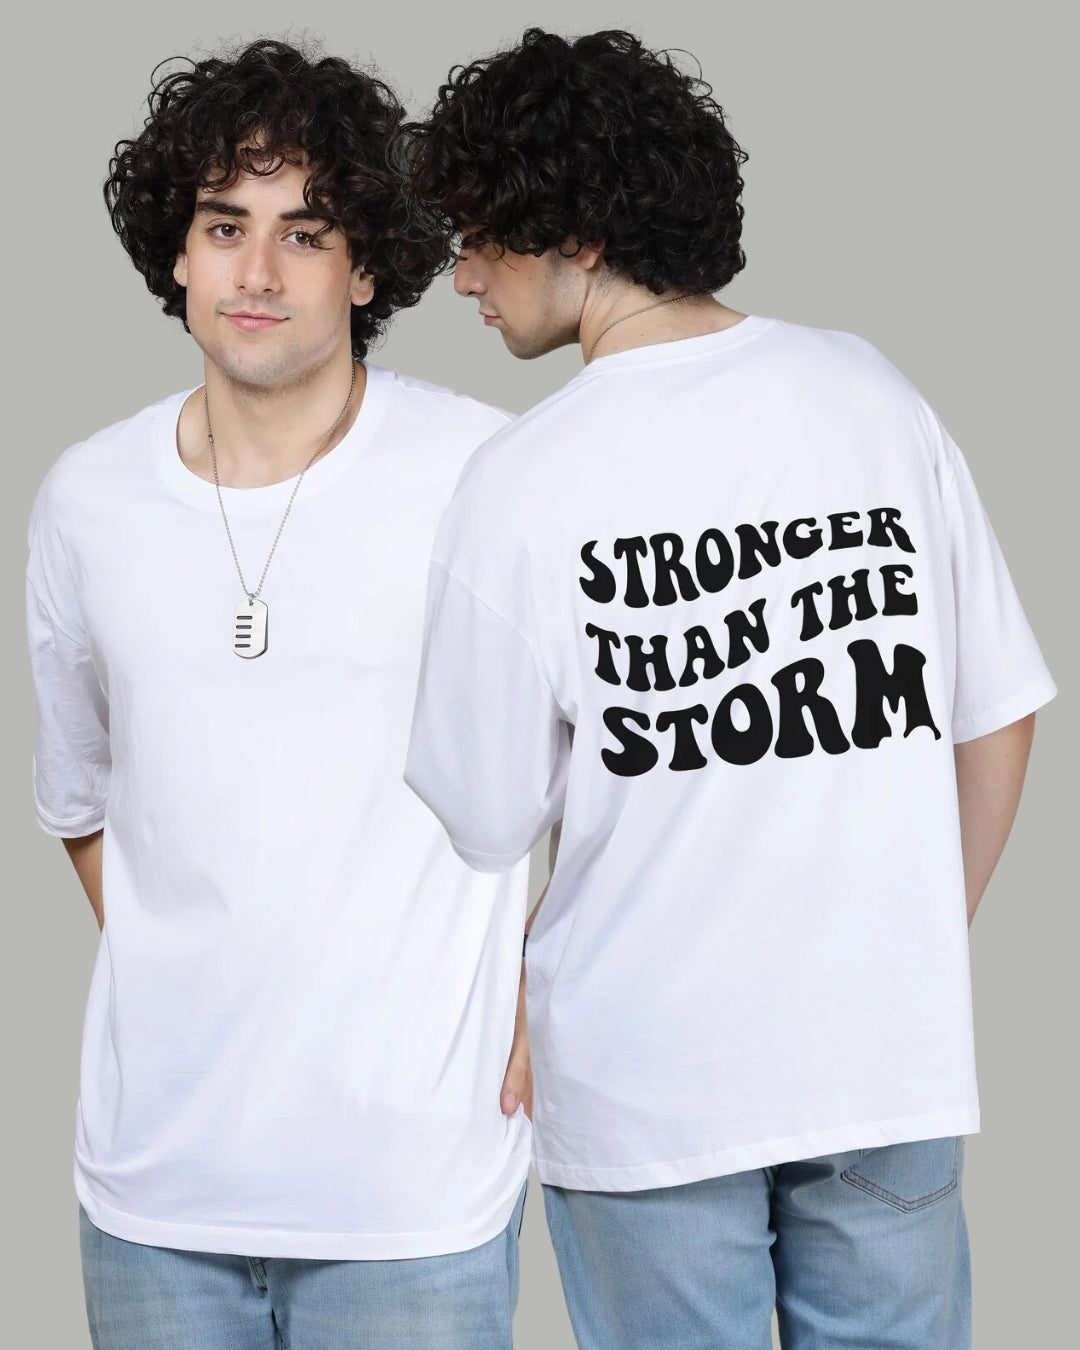 Stronger than the storm Radiant White - Printed Oversized Tees